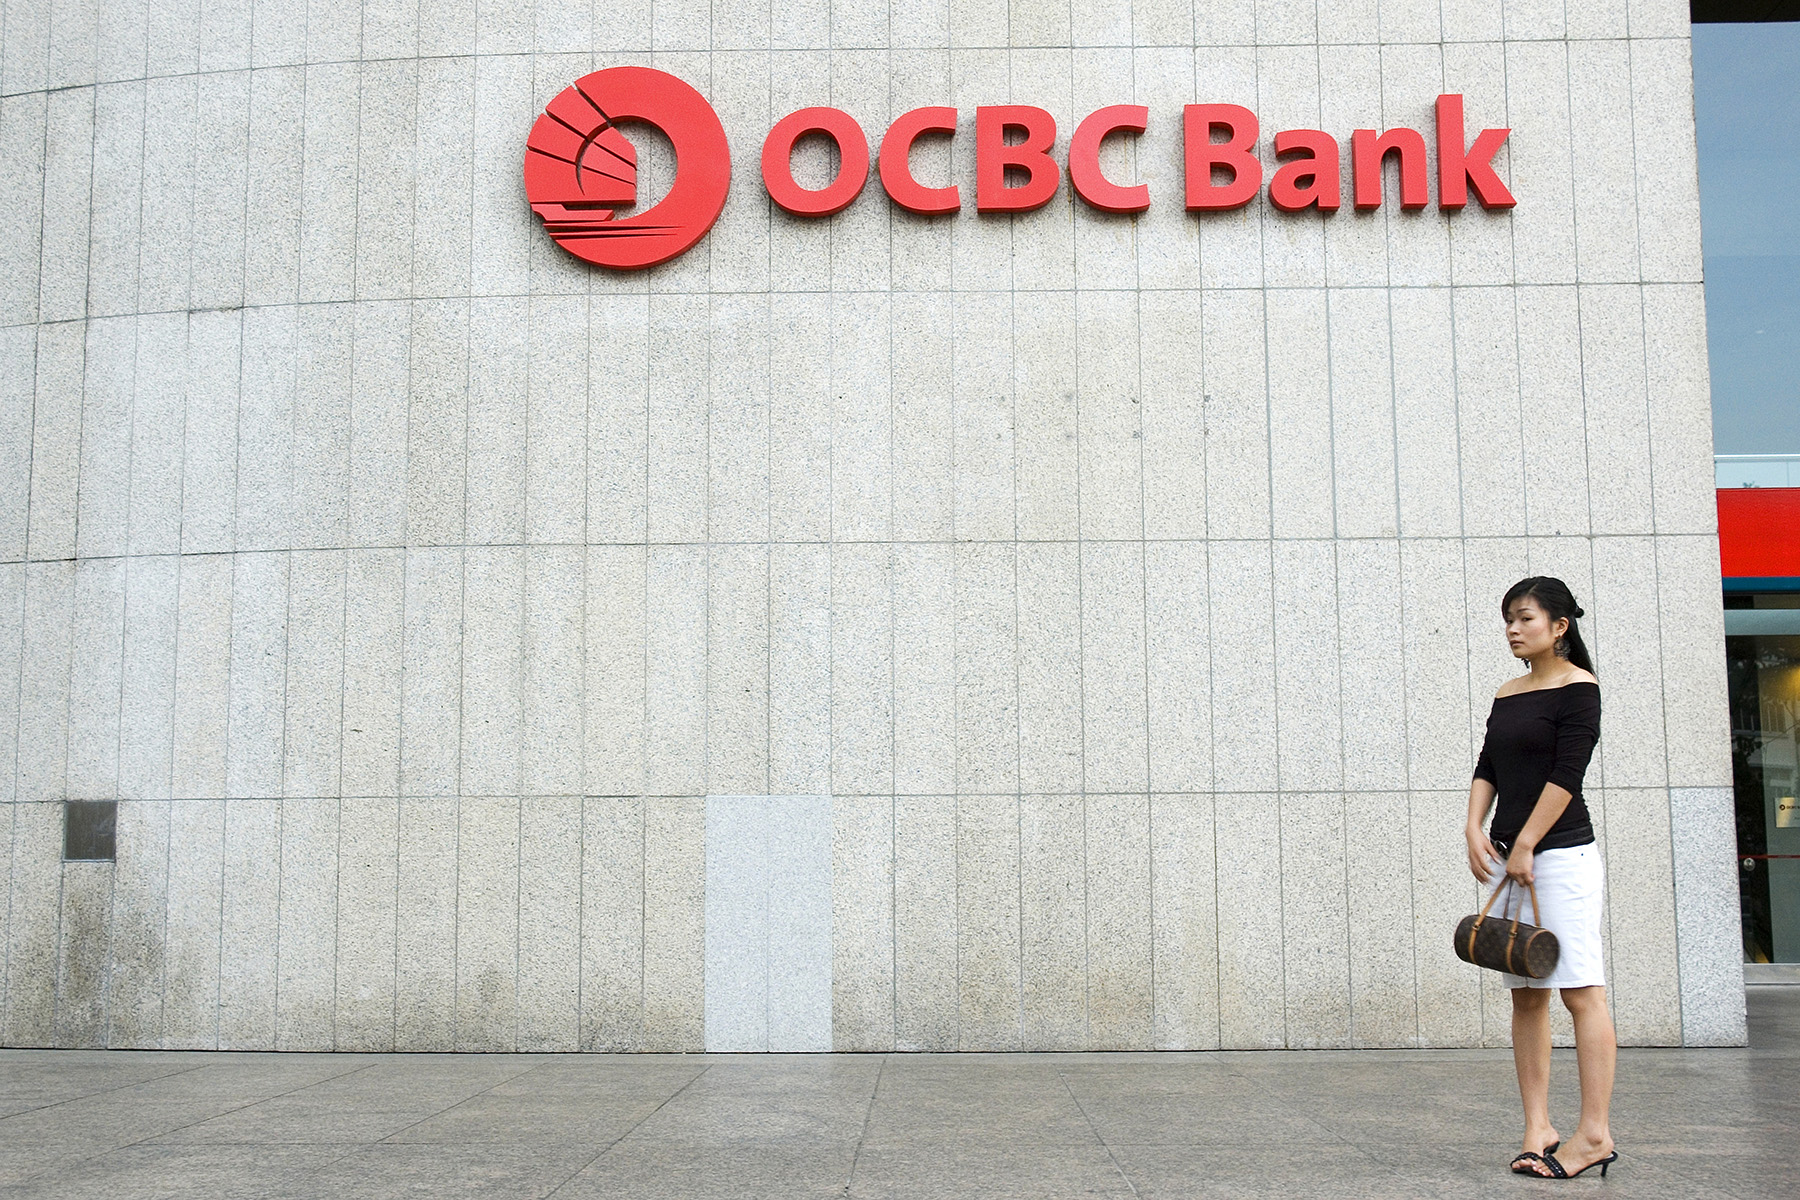 A woman stands in front of the OCBC Bank building in the Raffles Place banking district in Singapore

